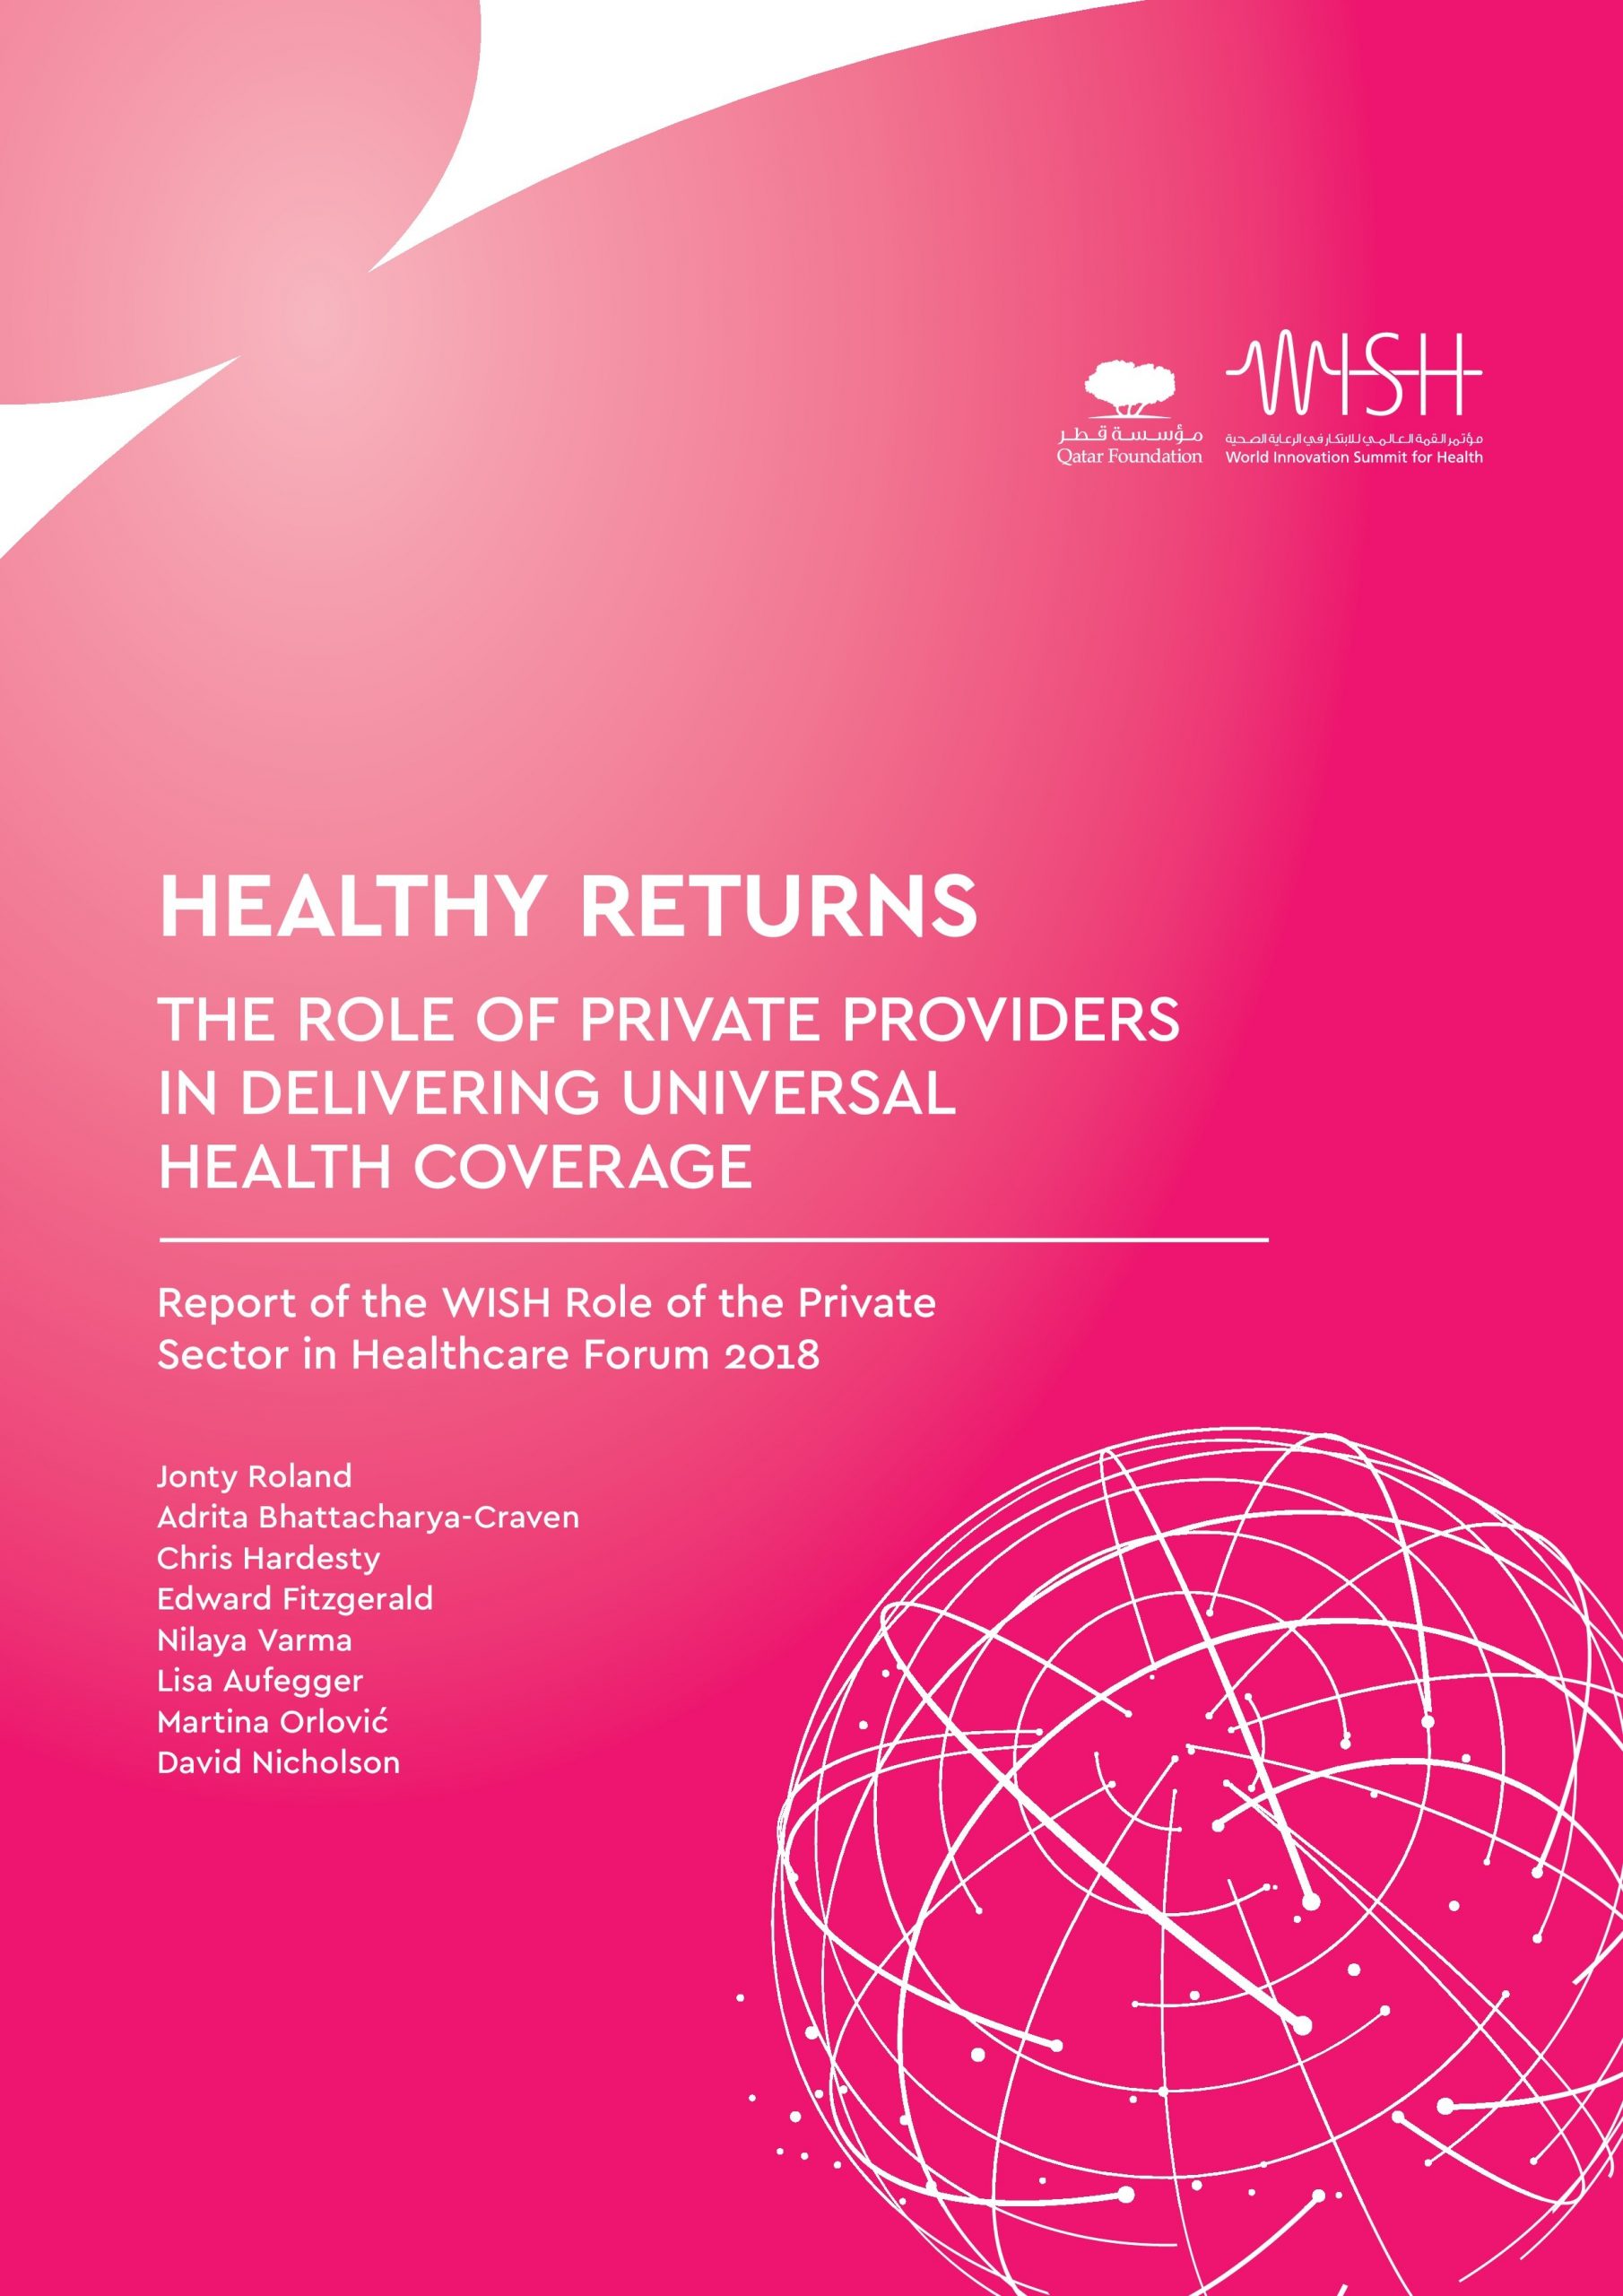 Healthy Returns: The Role of Private Providers in delivering Universal Health Coverage